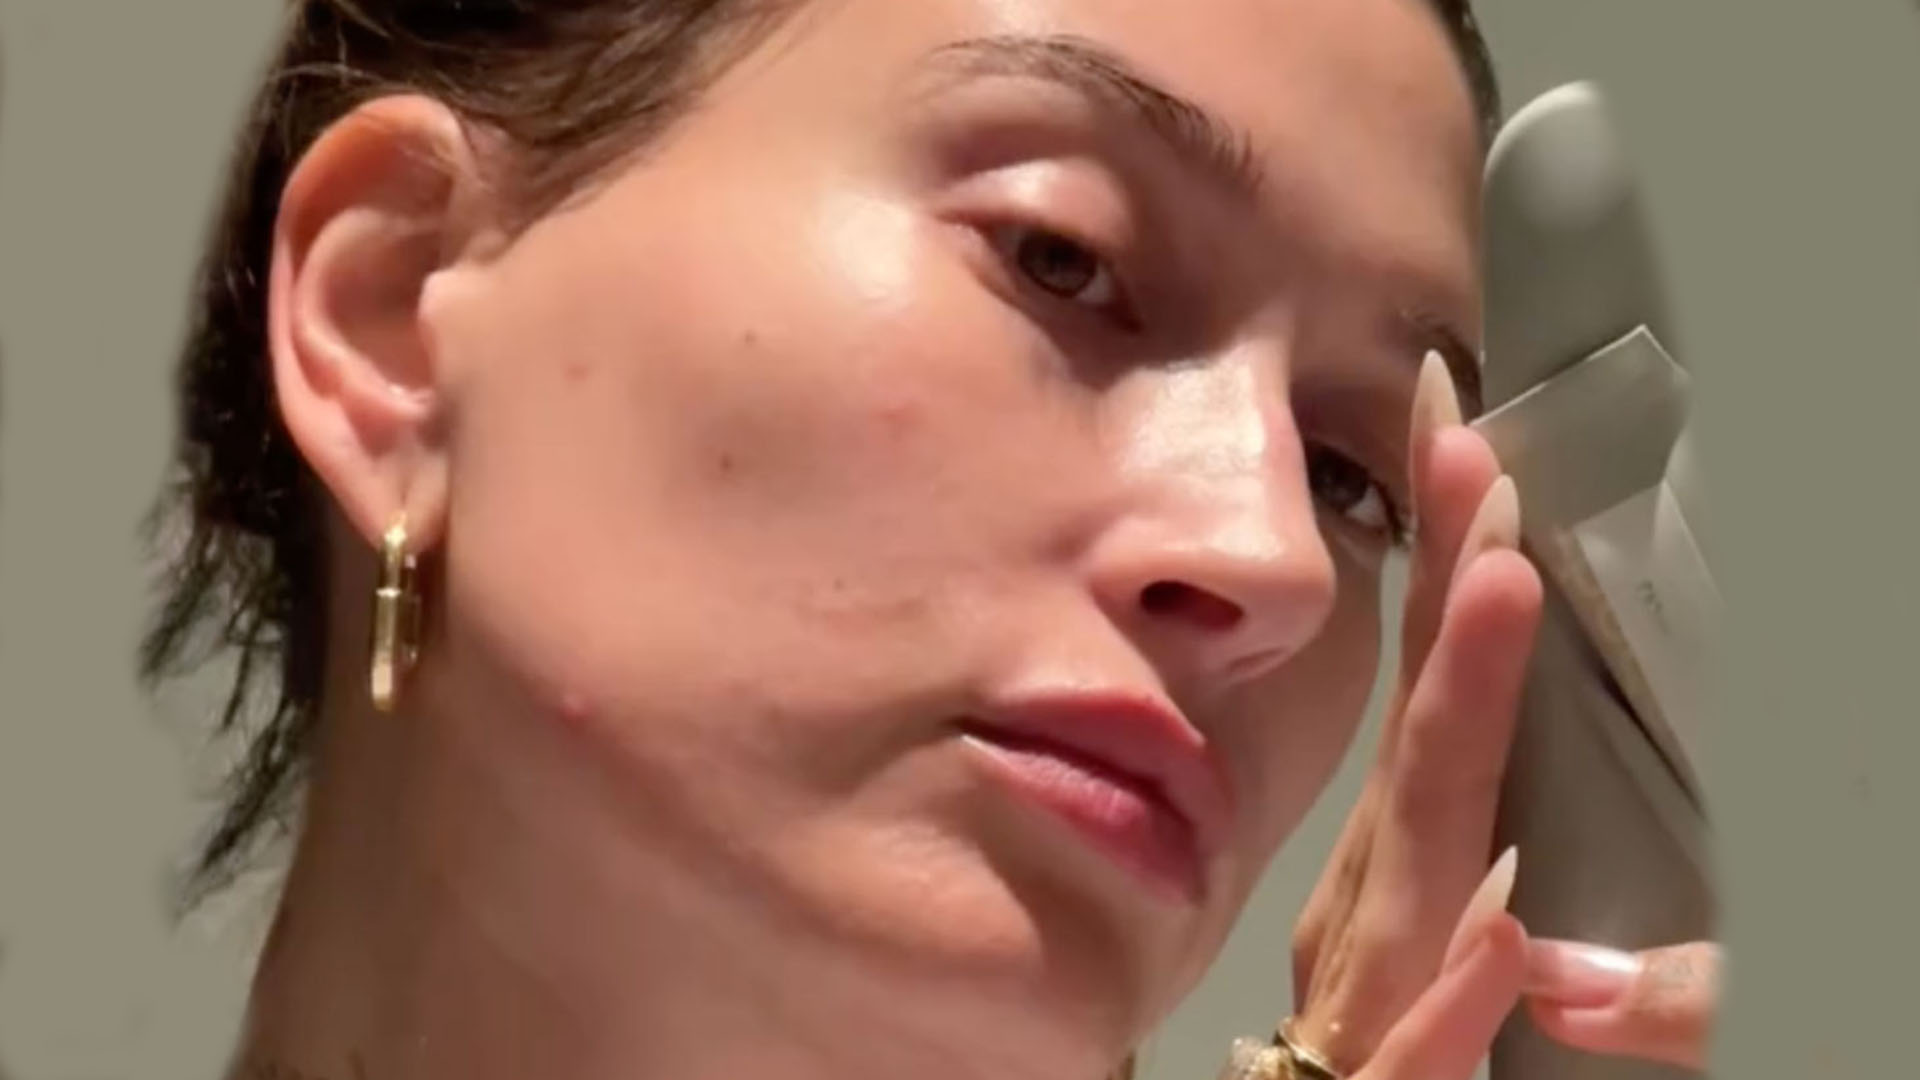 Hailey Bieber reveals ‘bad flare-up’ of skin disorder with ‘tiny red bumps’ on her face in unedited video at home